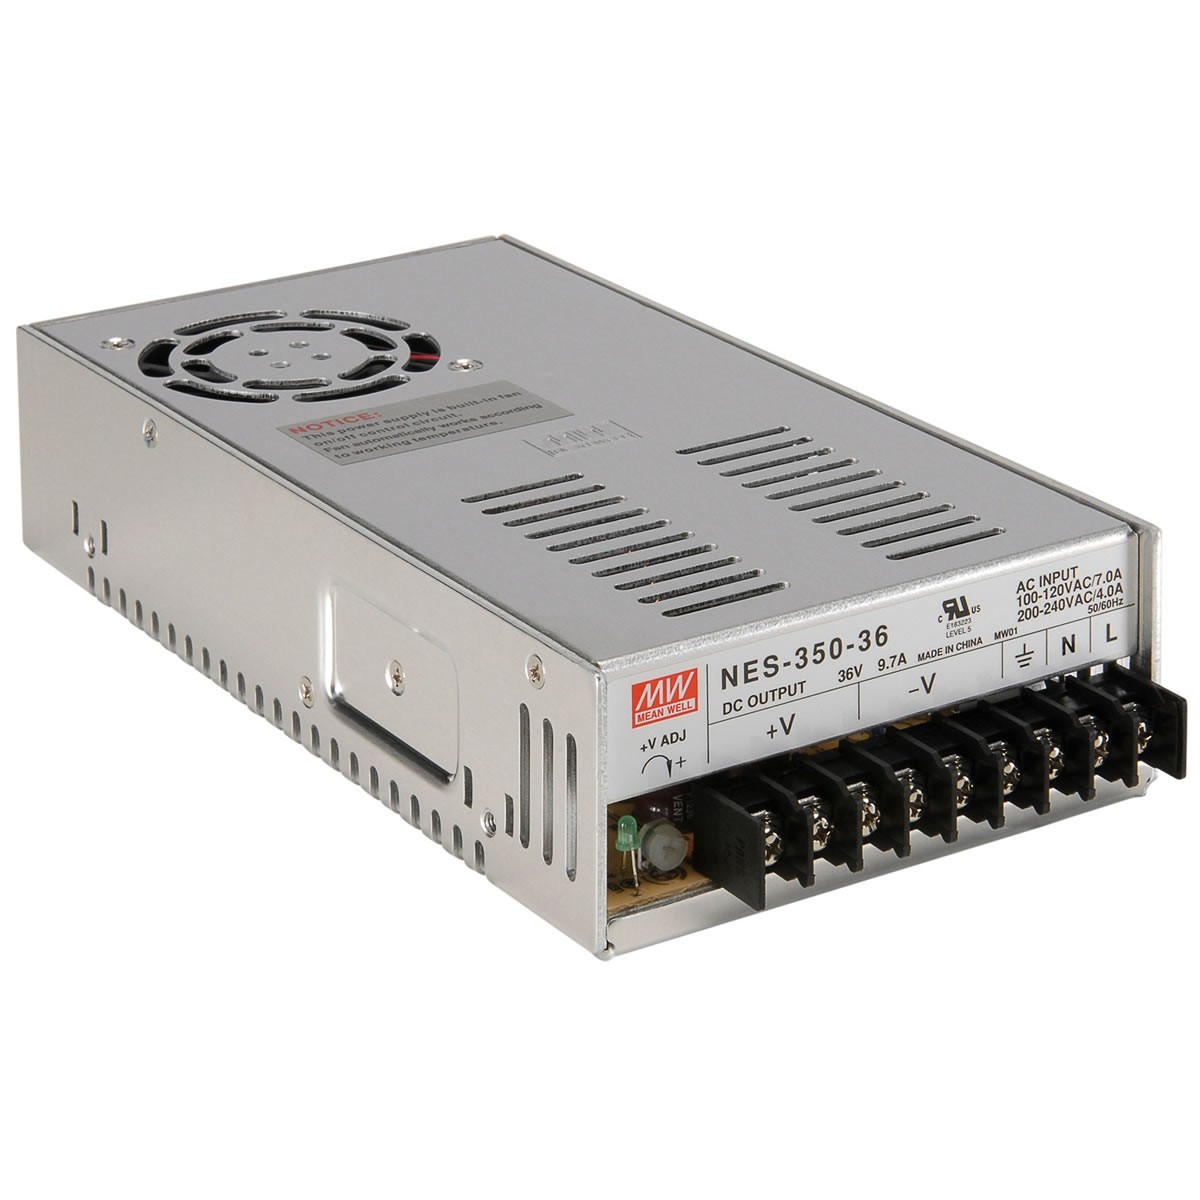 MEAN WELL NES-350-36 36 VDC 9.7A 350W Regulated Switching Power Supply 